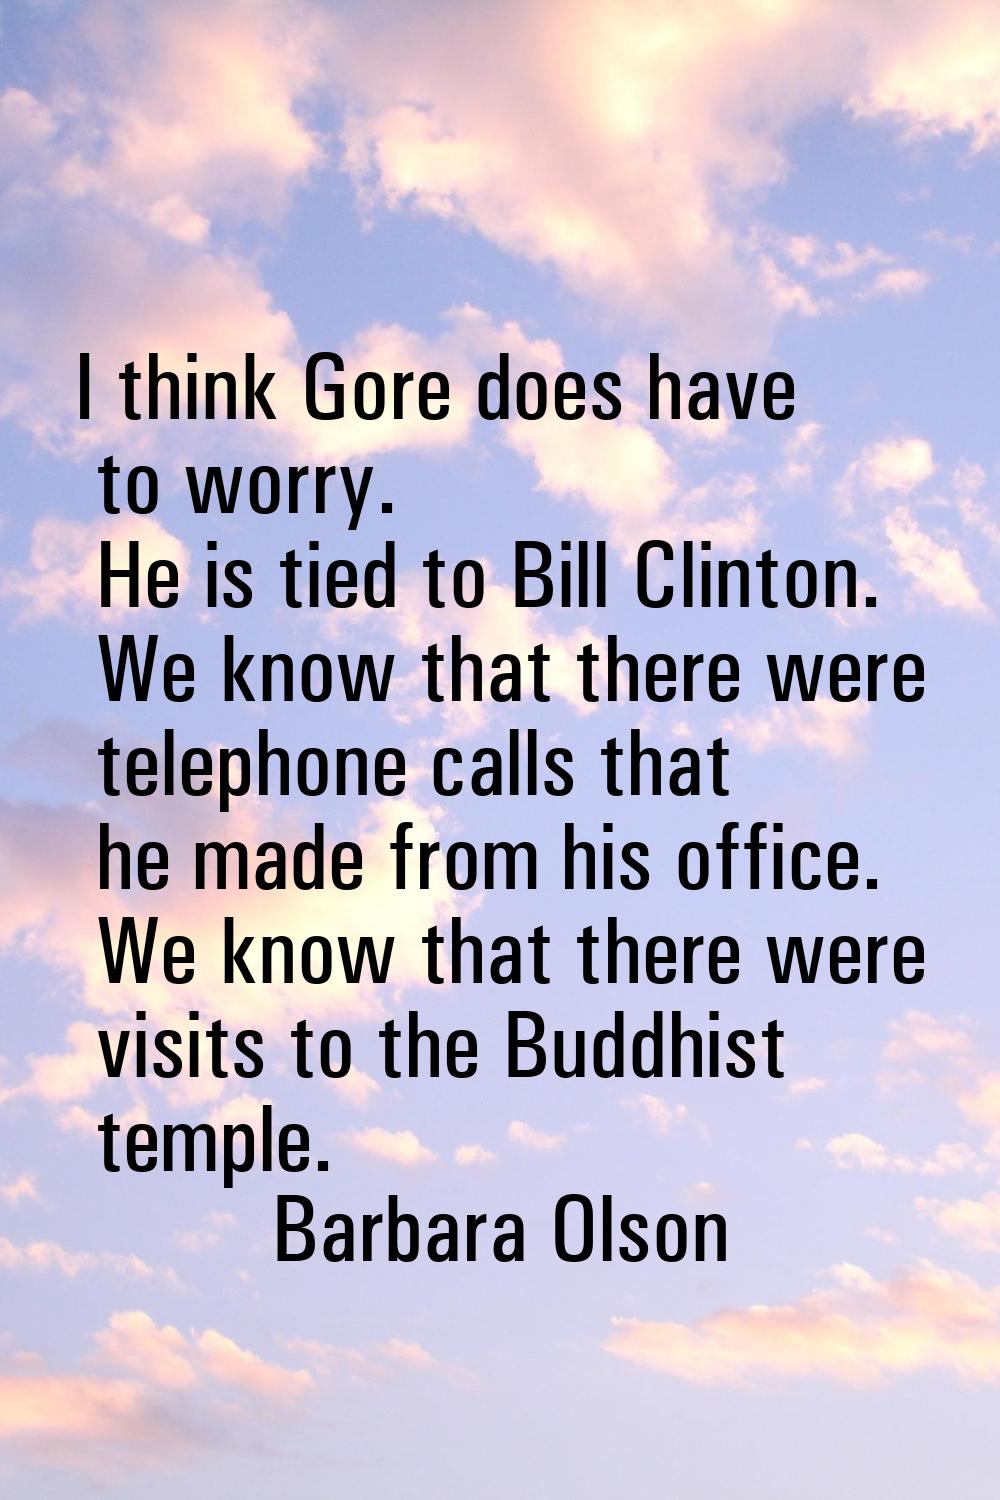 I think Gore does have to worry. He is tied to Bill Clinton. We know that there were telephone call